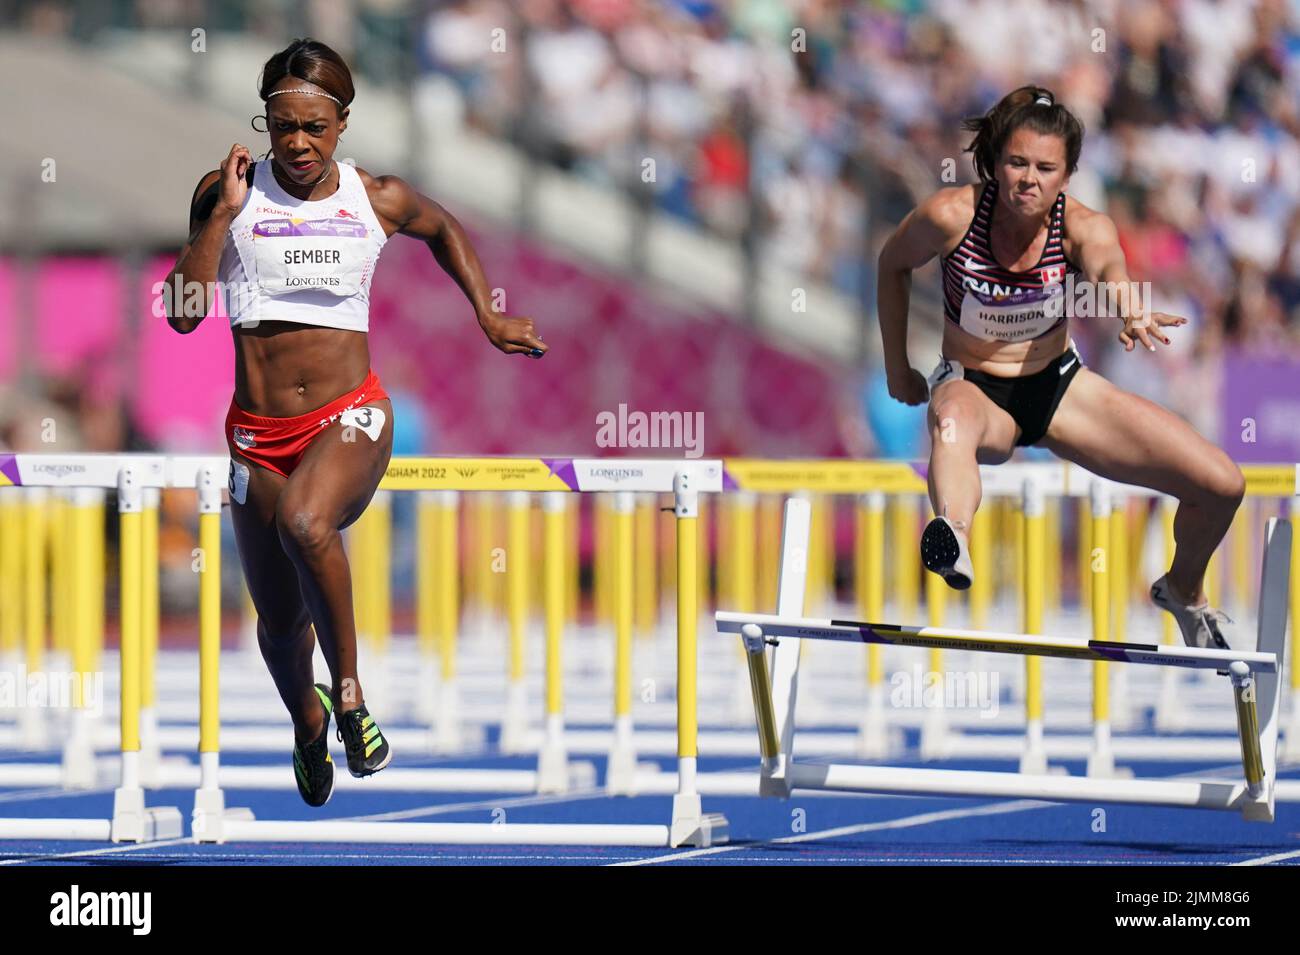 England's Cindy Sember (left) during Women's 100m Hurdles - Final at Alexander Stadium on day ten of the 2022 Commonwealth Games in Birmingham. Picture date: Sunday August 7, 2022. Stock Photo